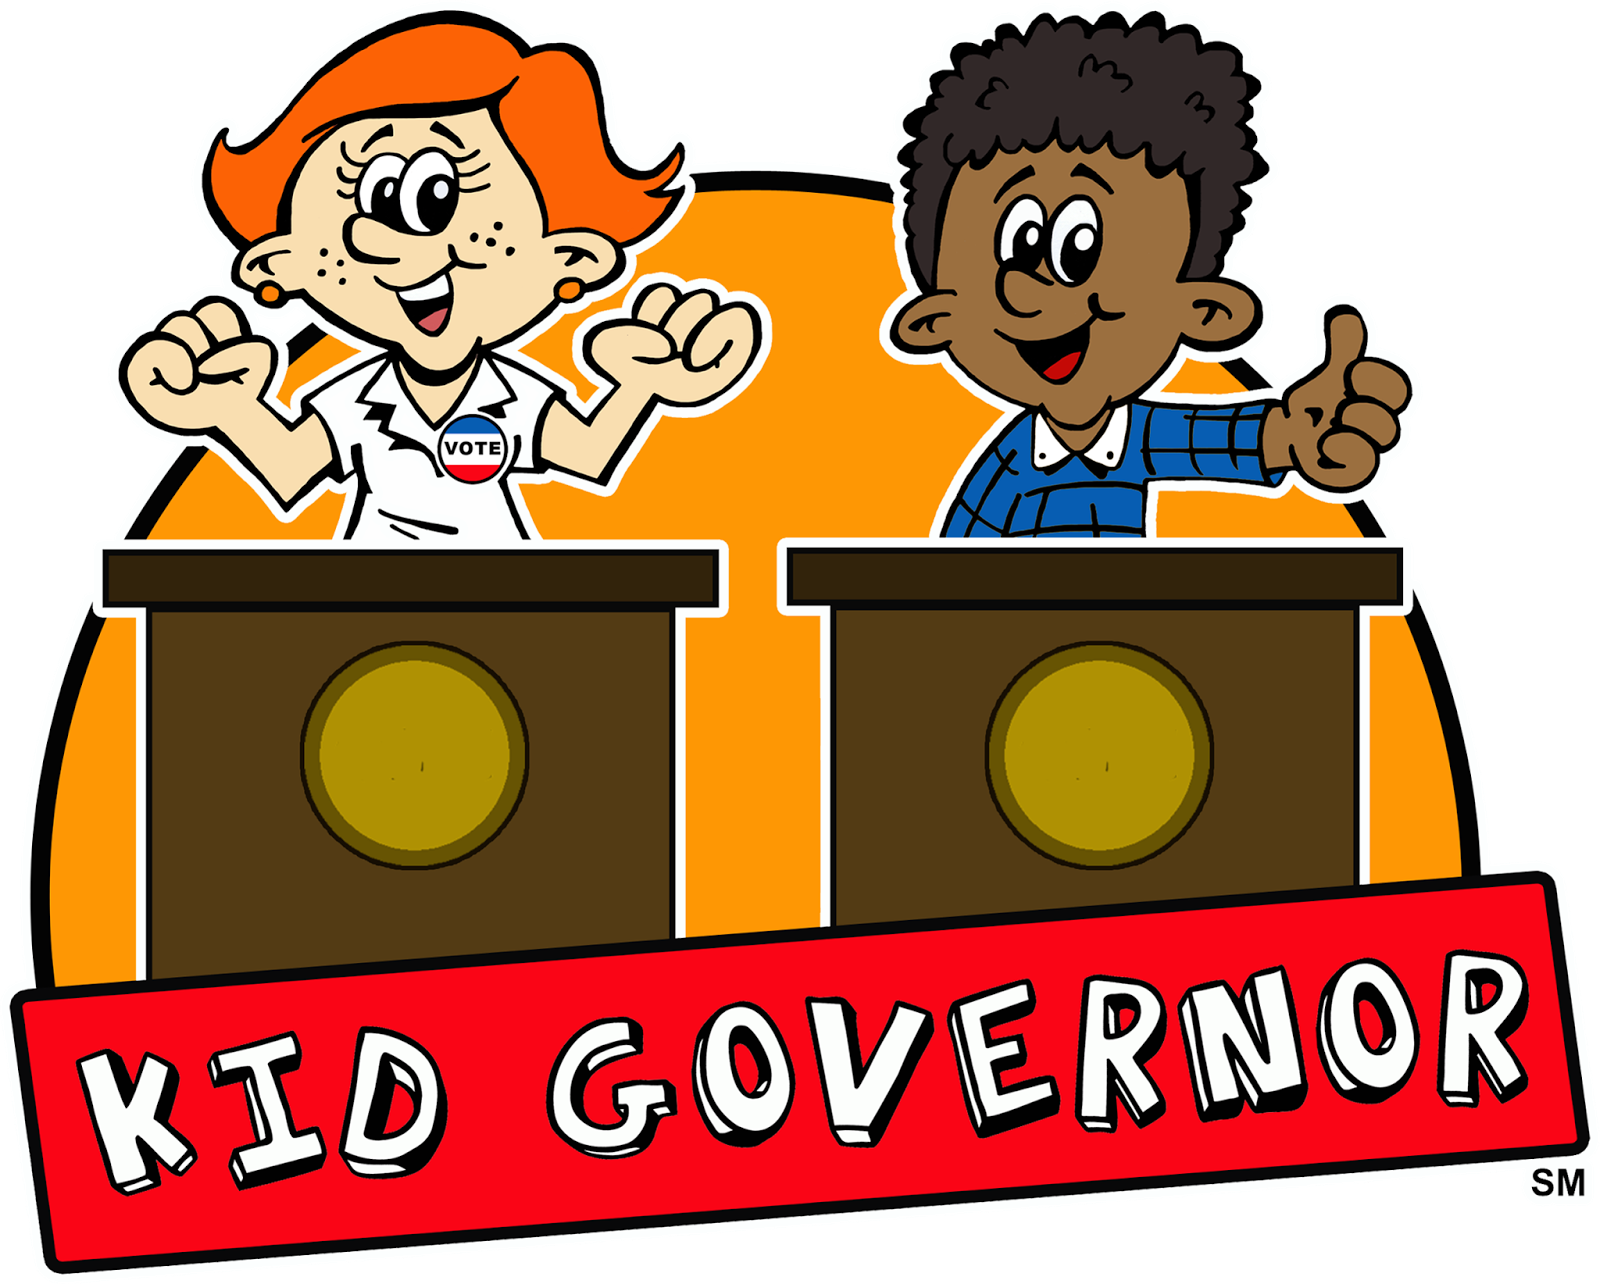 conference clipart oath ceremony